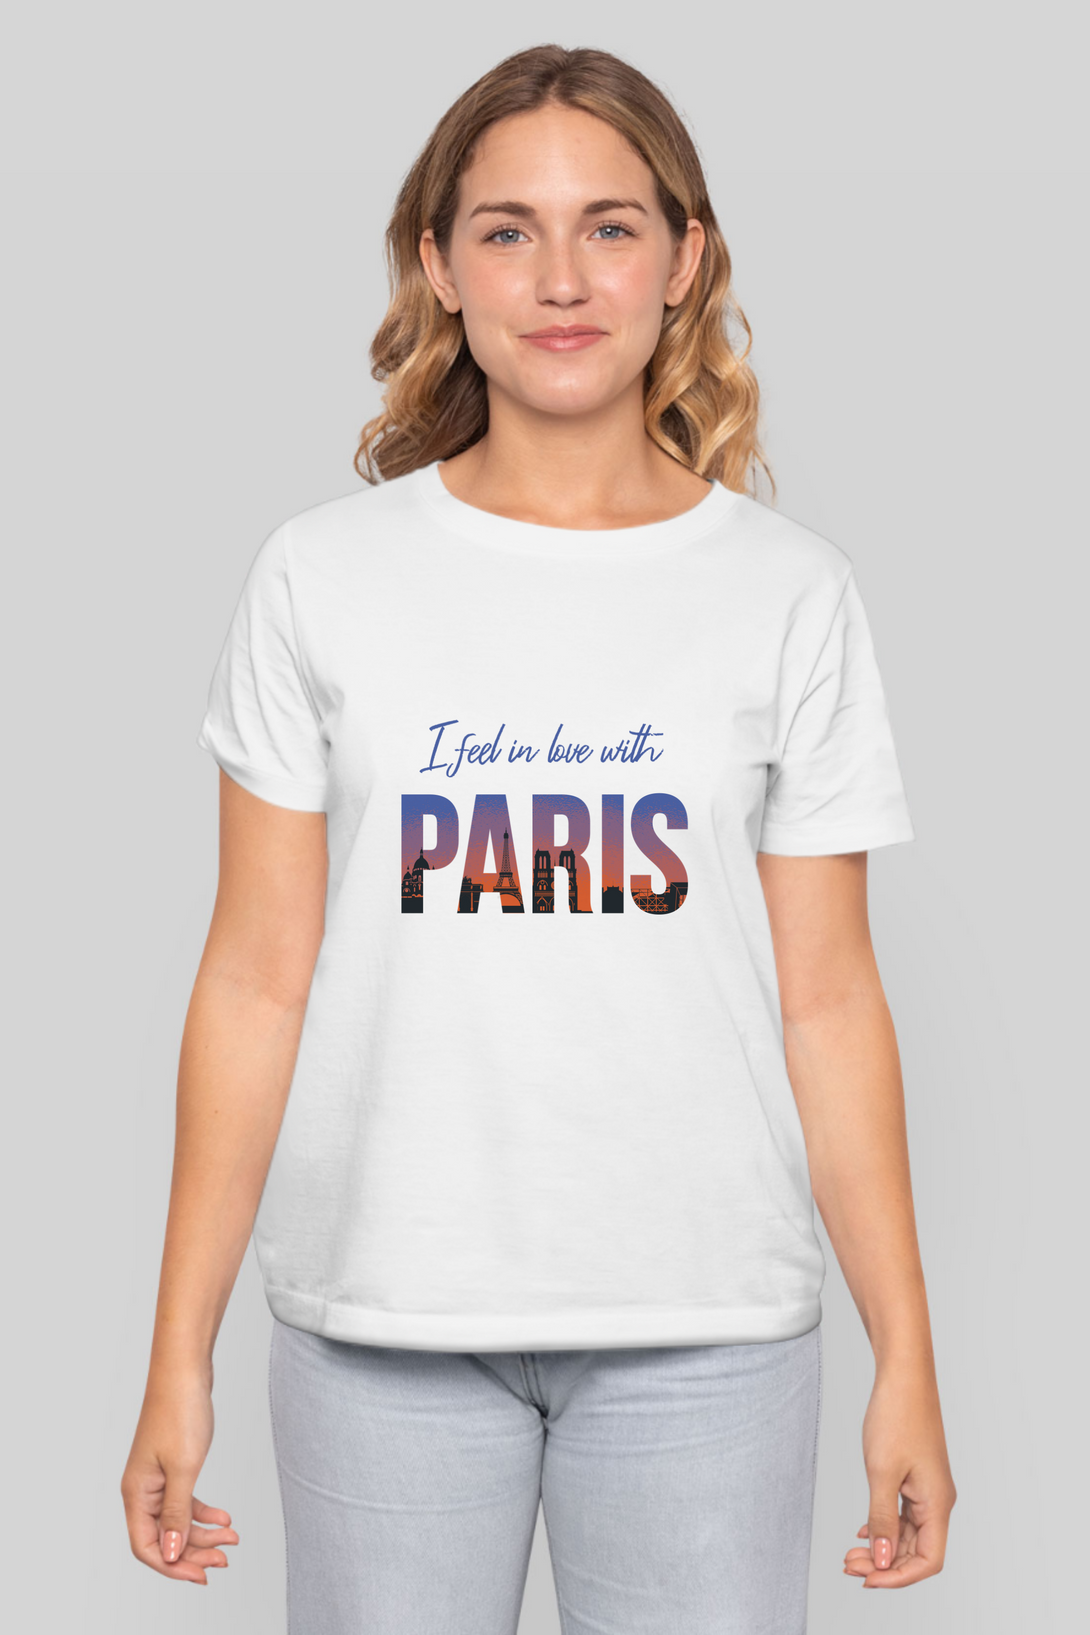 In Love With Paris Printed T-Shirt For Women - WowWaves - 7